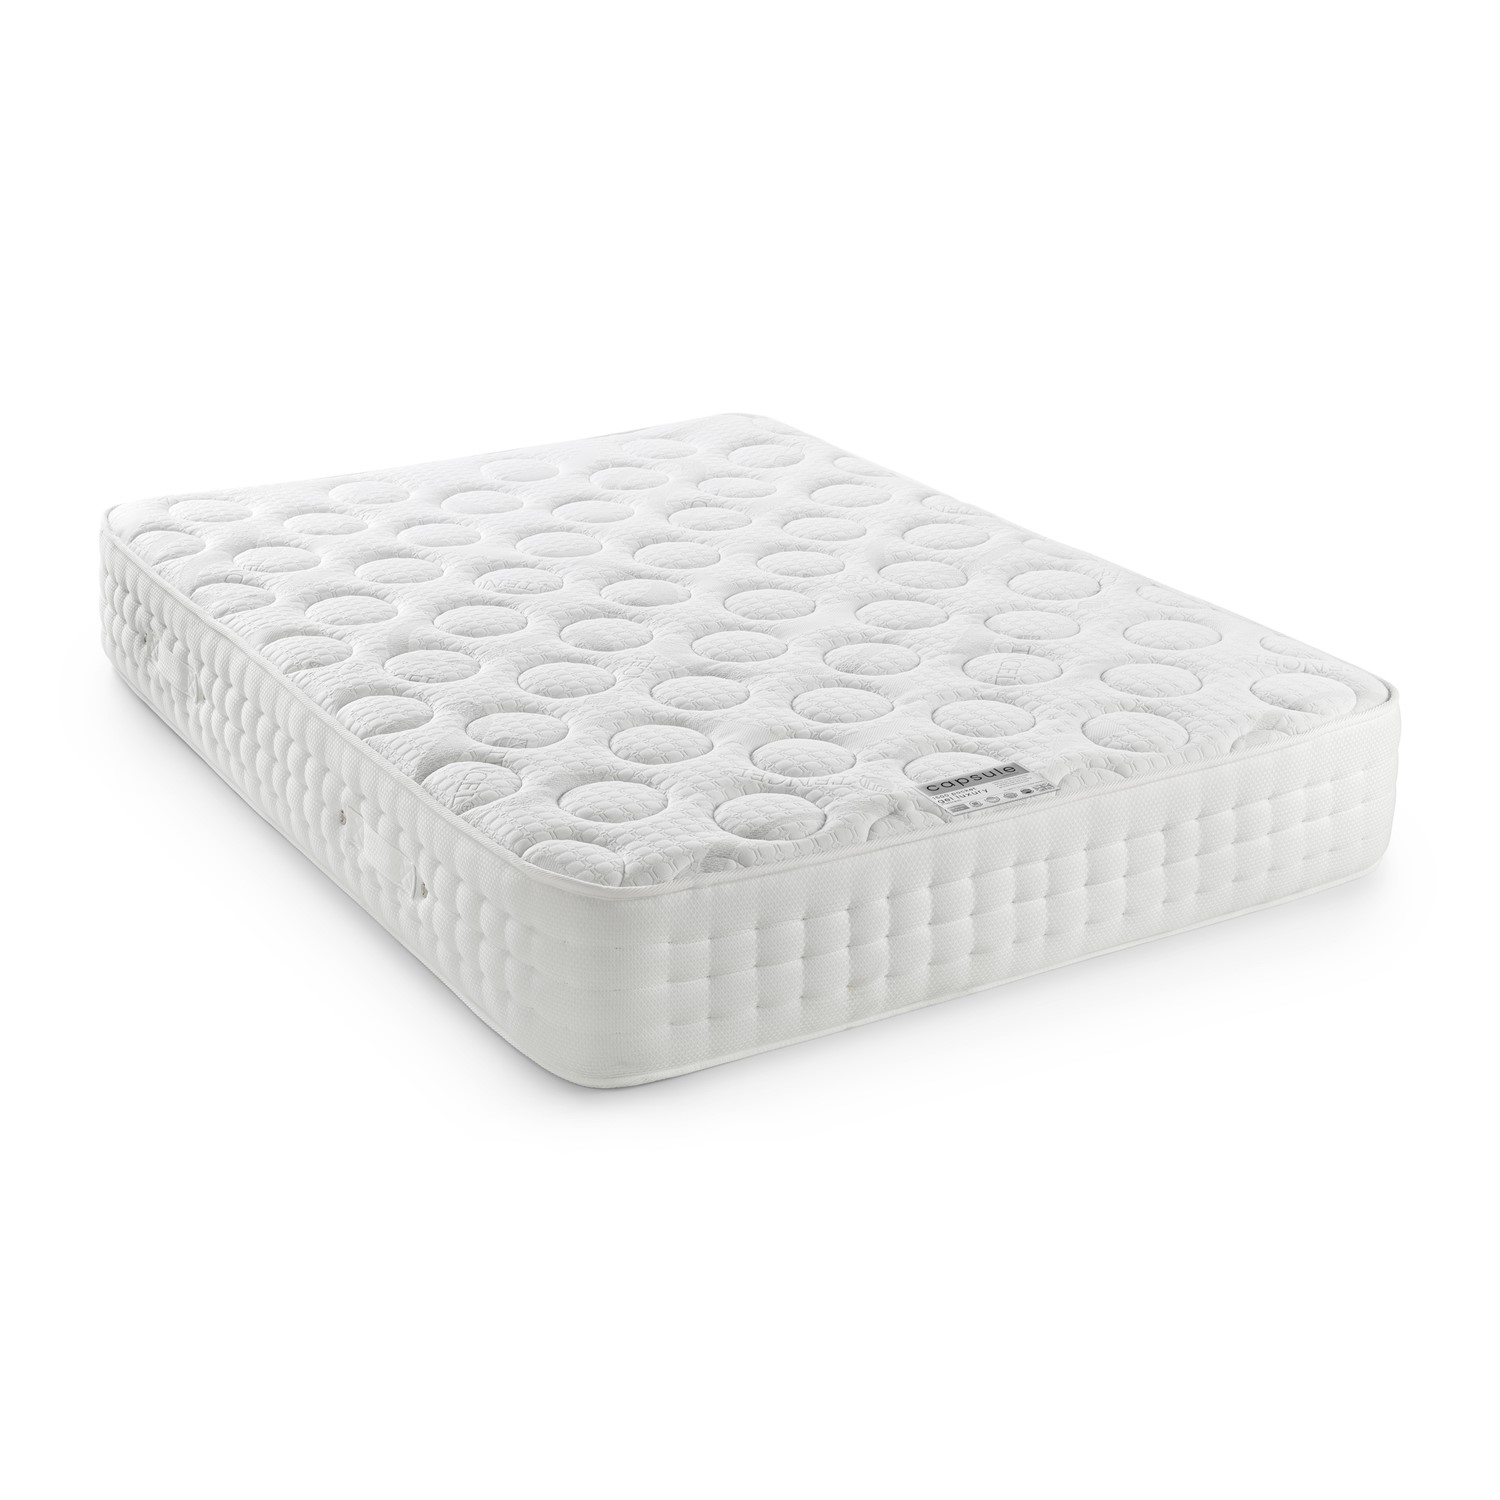 Read more about King size 1500 pocket sprung and gel hybrid cooling mattress capsule julian bowen